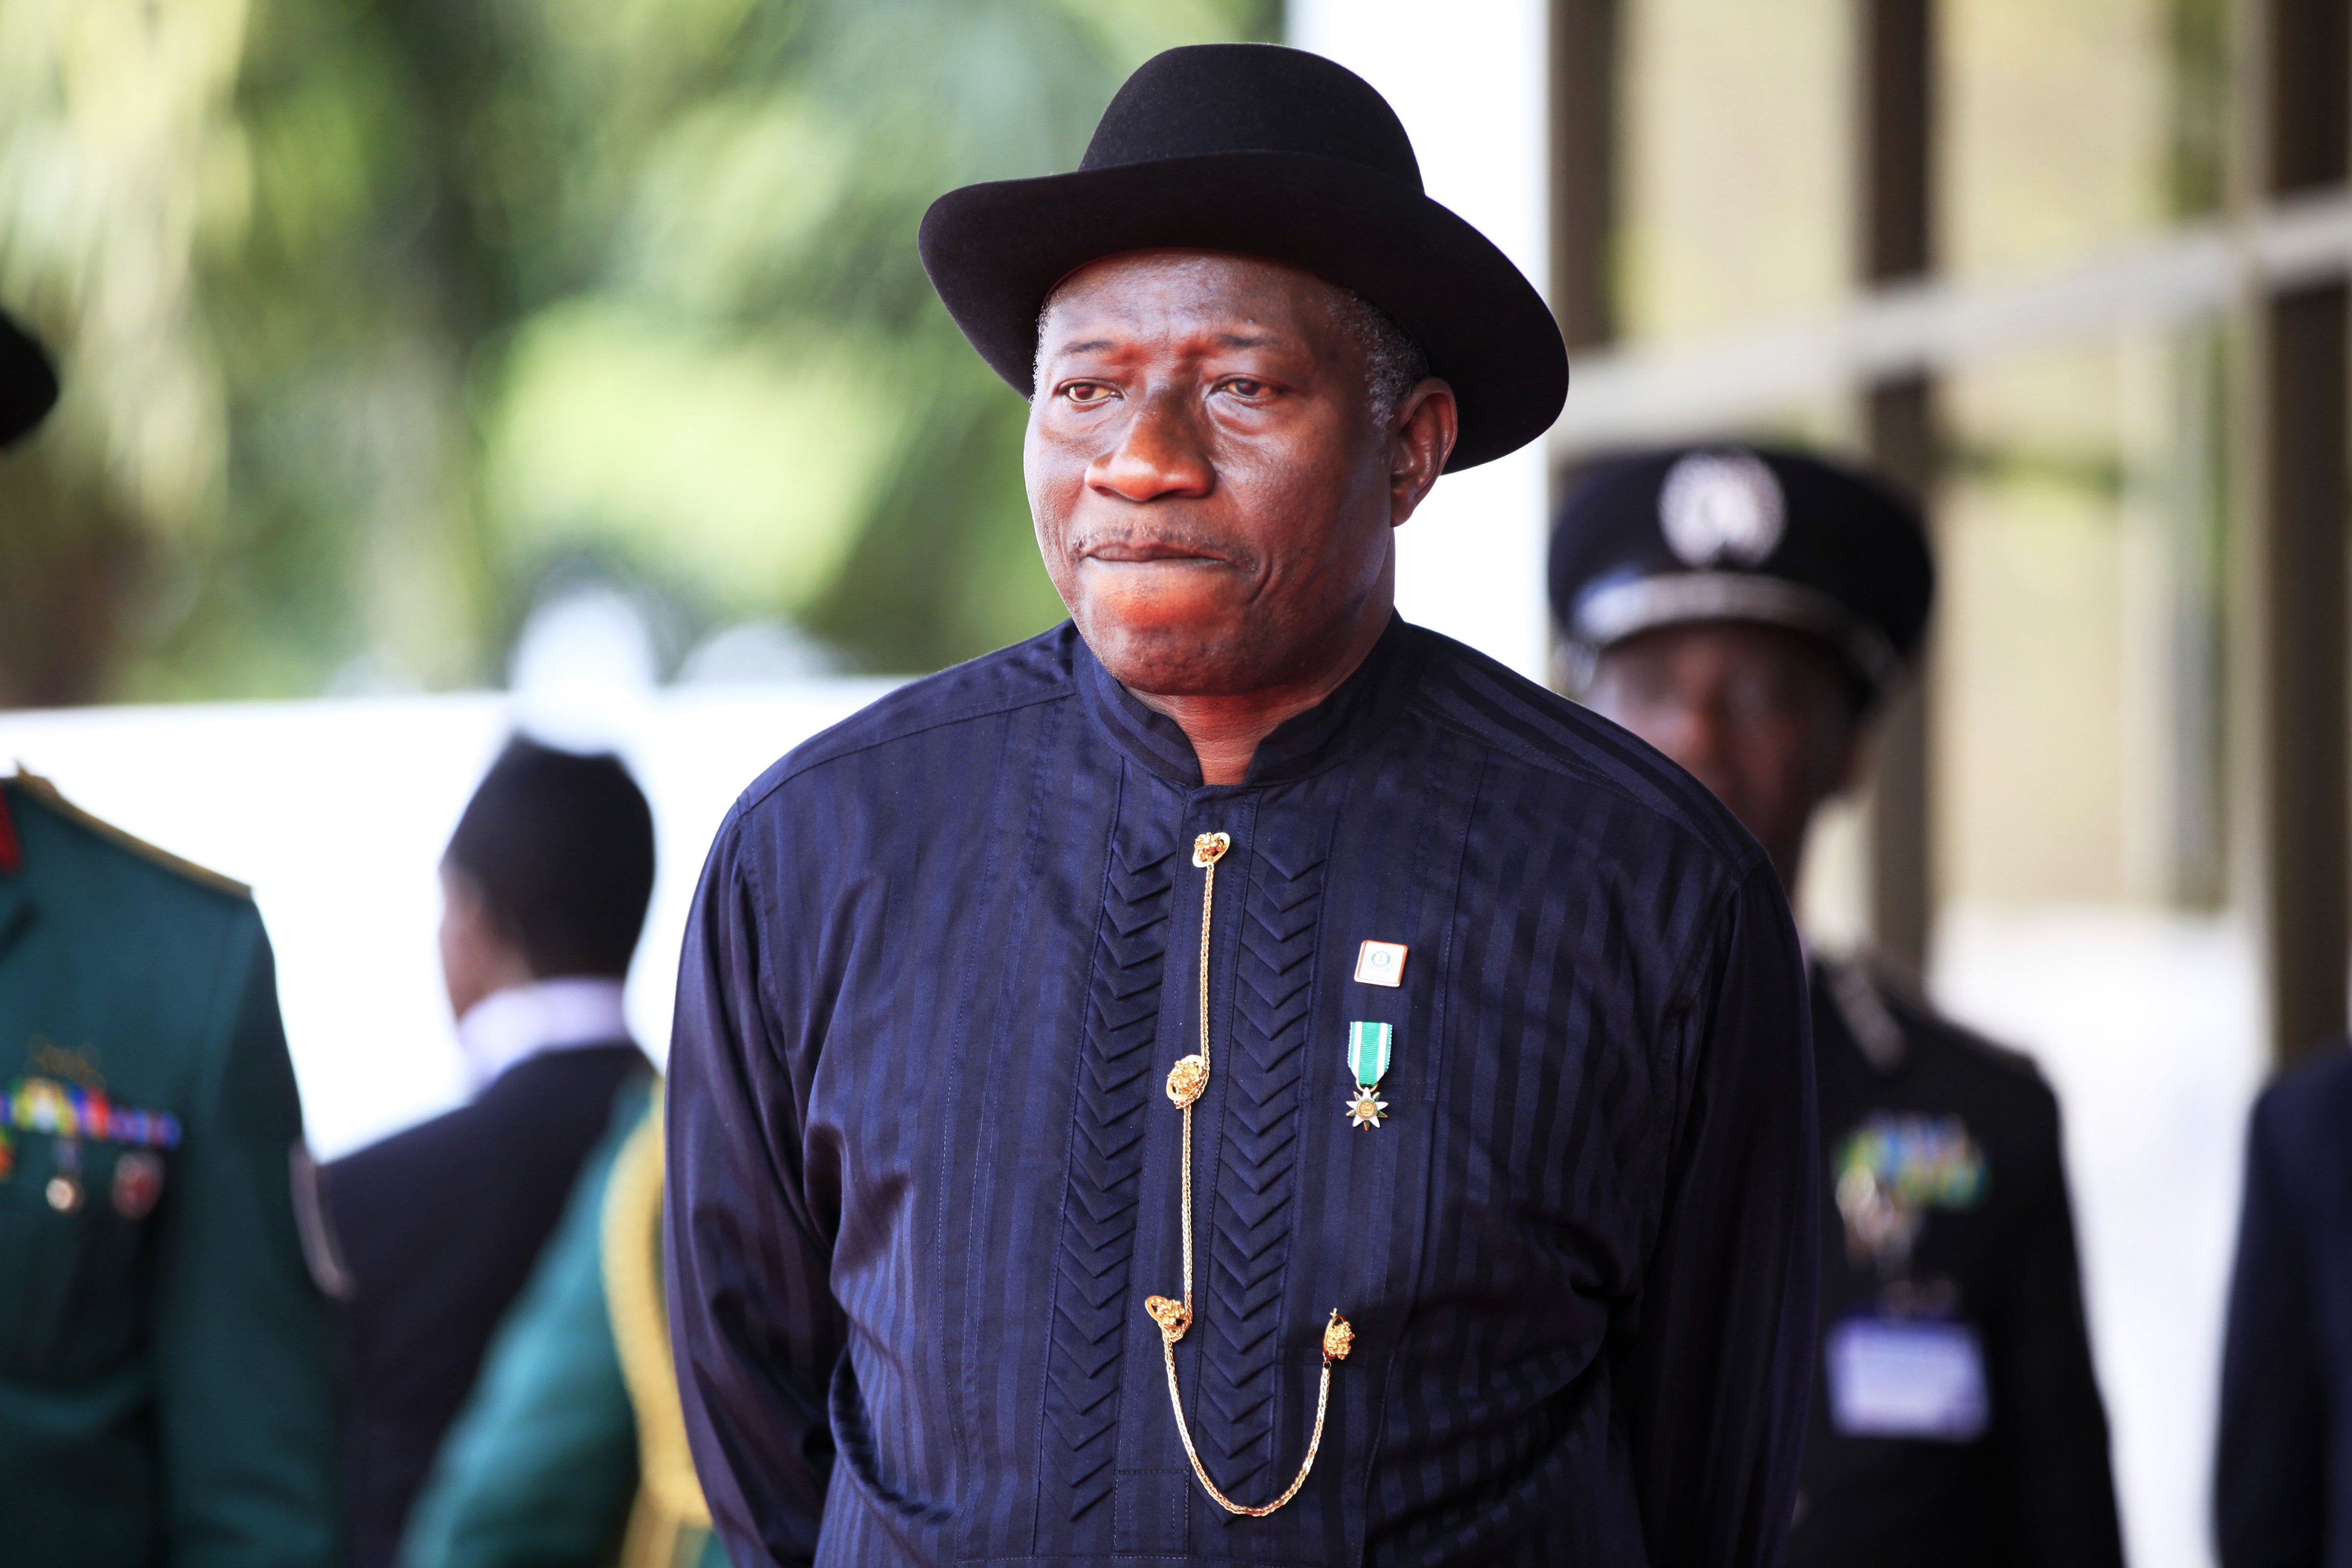 Nigeria's President, Goodluck Jonathan, arrives for a summit to address a seminar on security during an event marking the centenary of the unification of Nigeria's north and south in Abuja, Nigeria, Thursday, Feb. 27, 2014. (Sunday Alamba—ASSOCIATED PRESS)